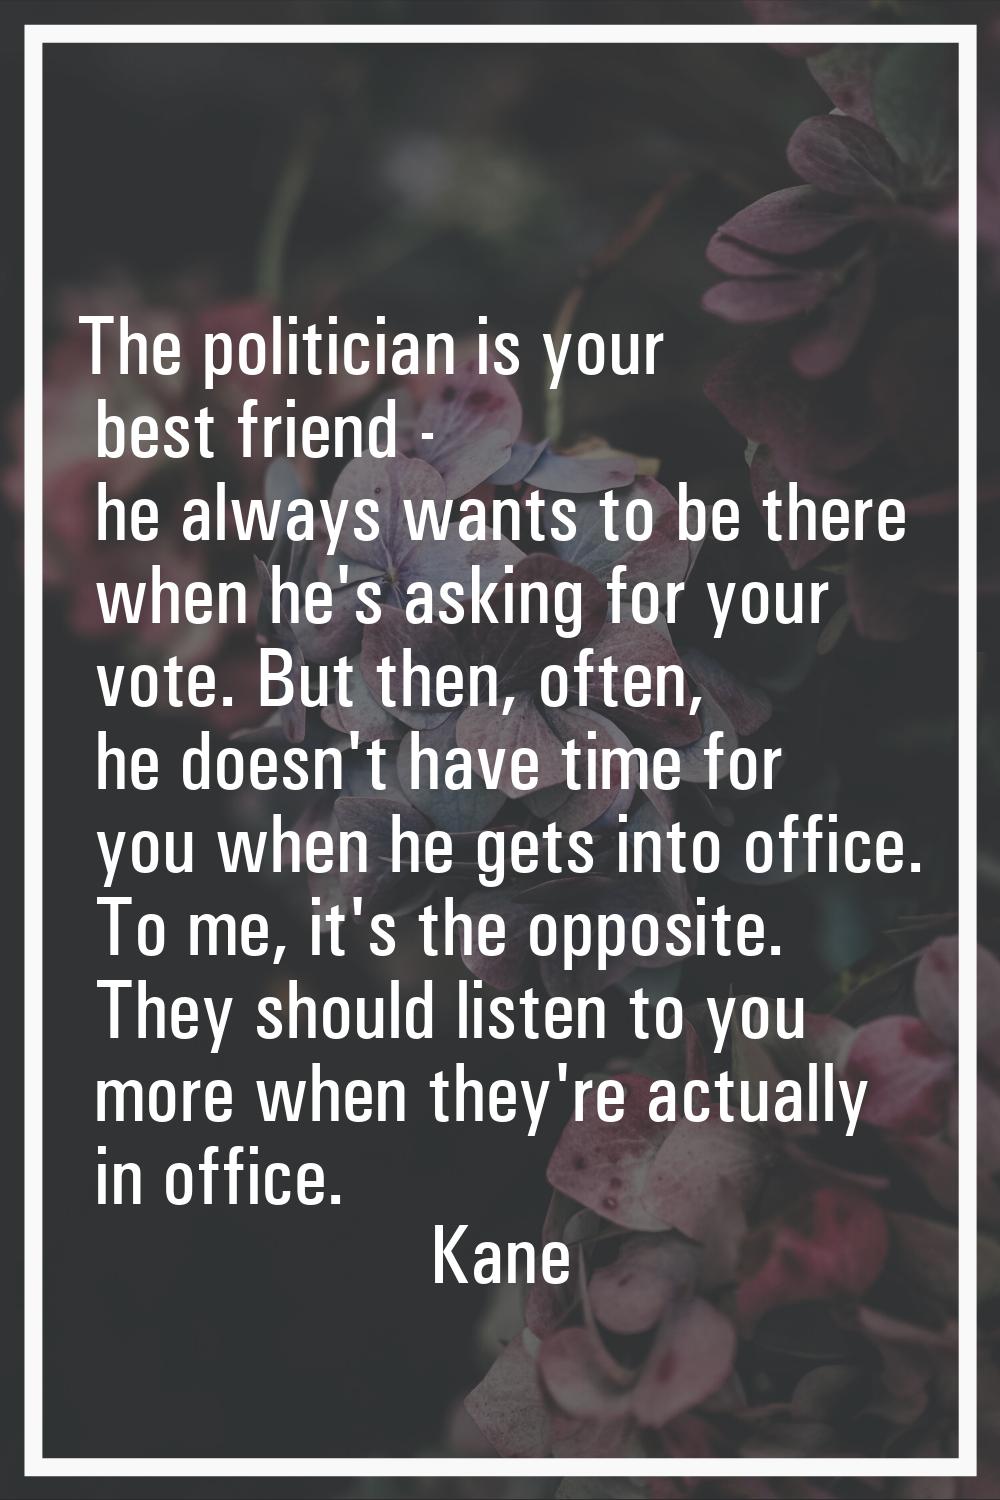 The politician is your best friend - he always wants to be there when he's asking for your vote. Bu